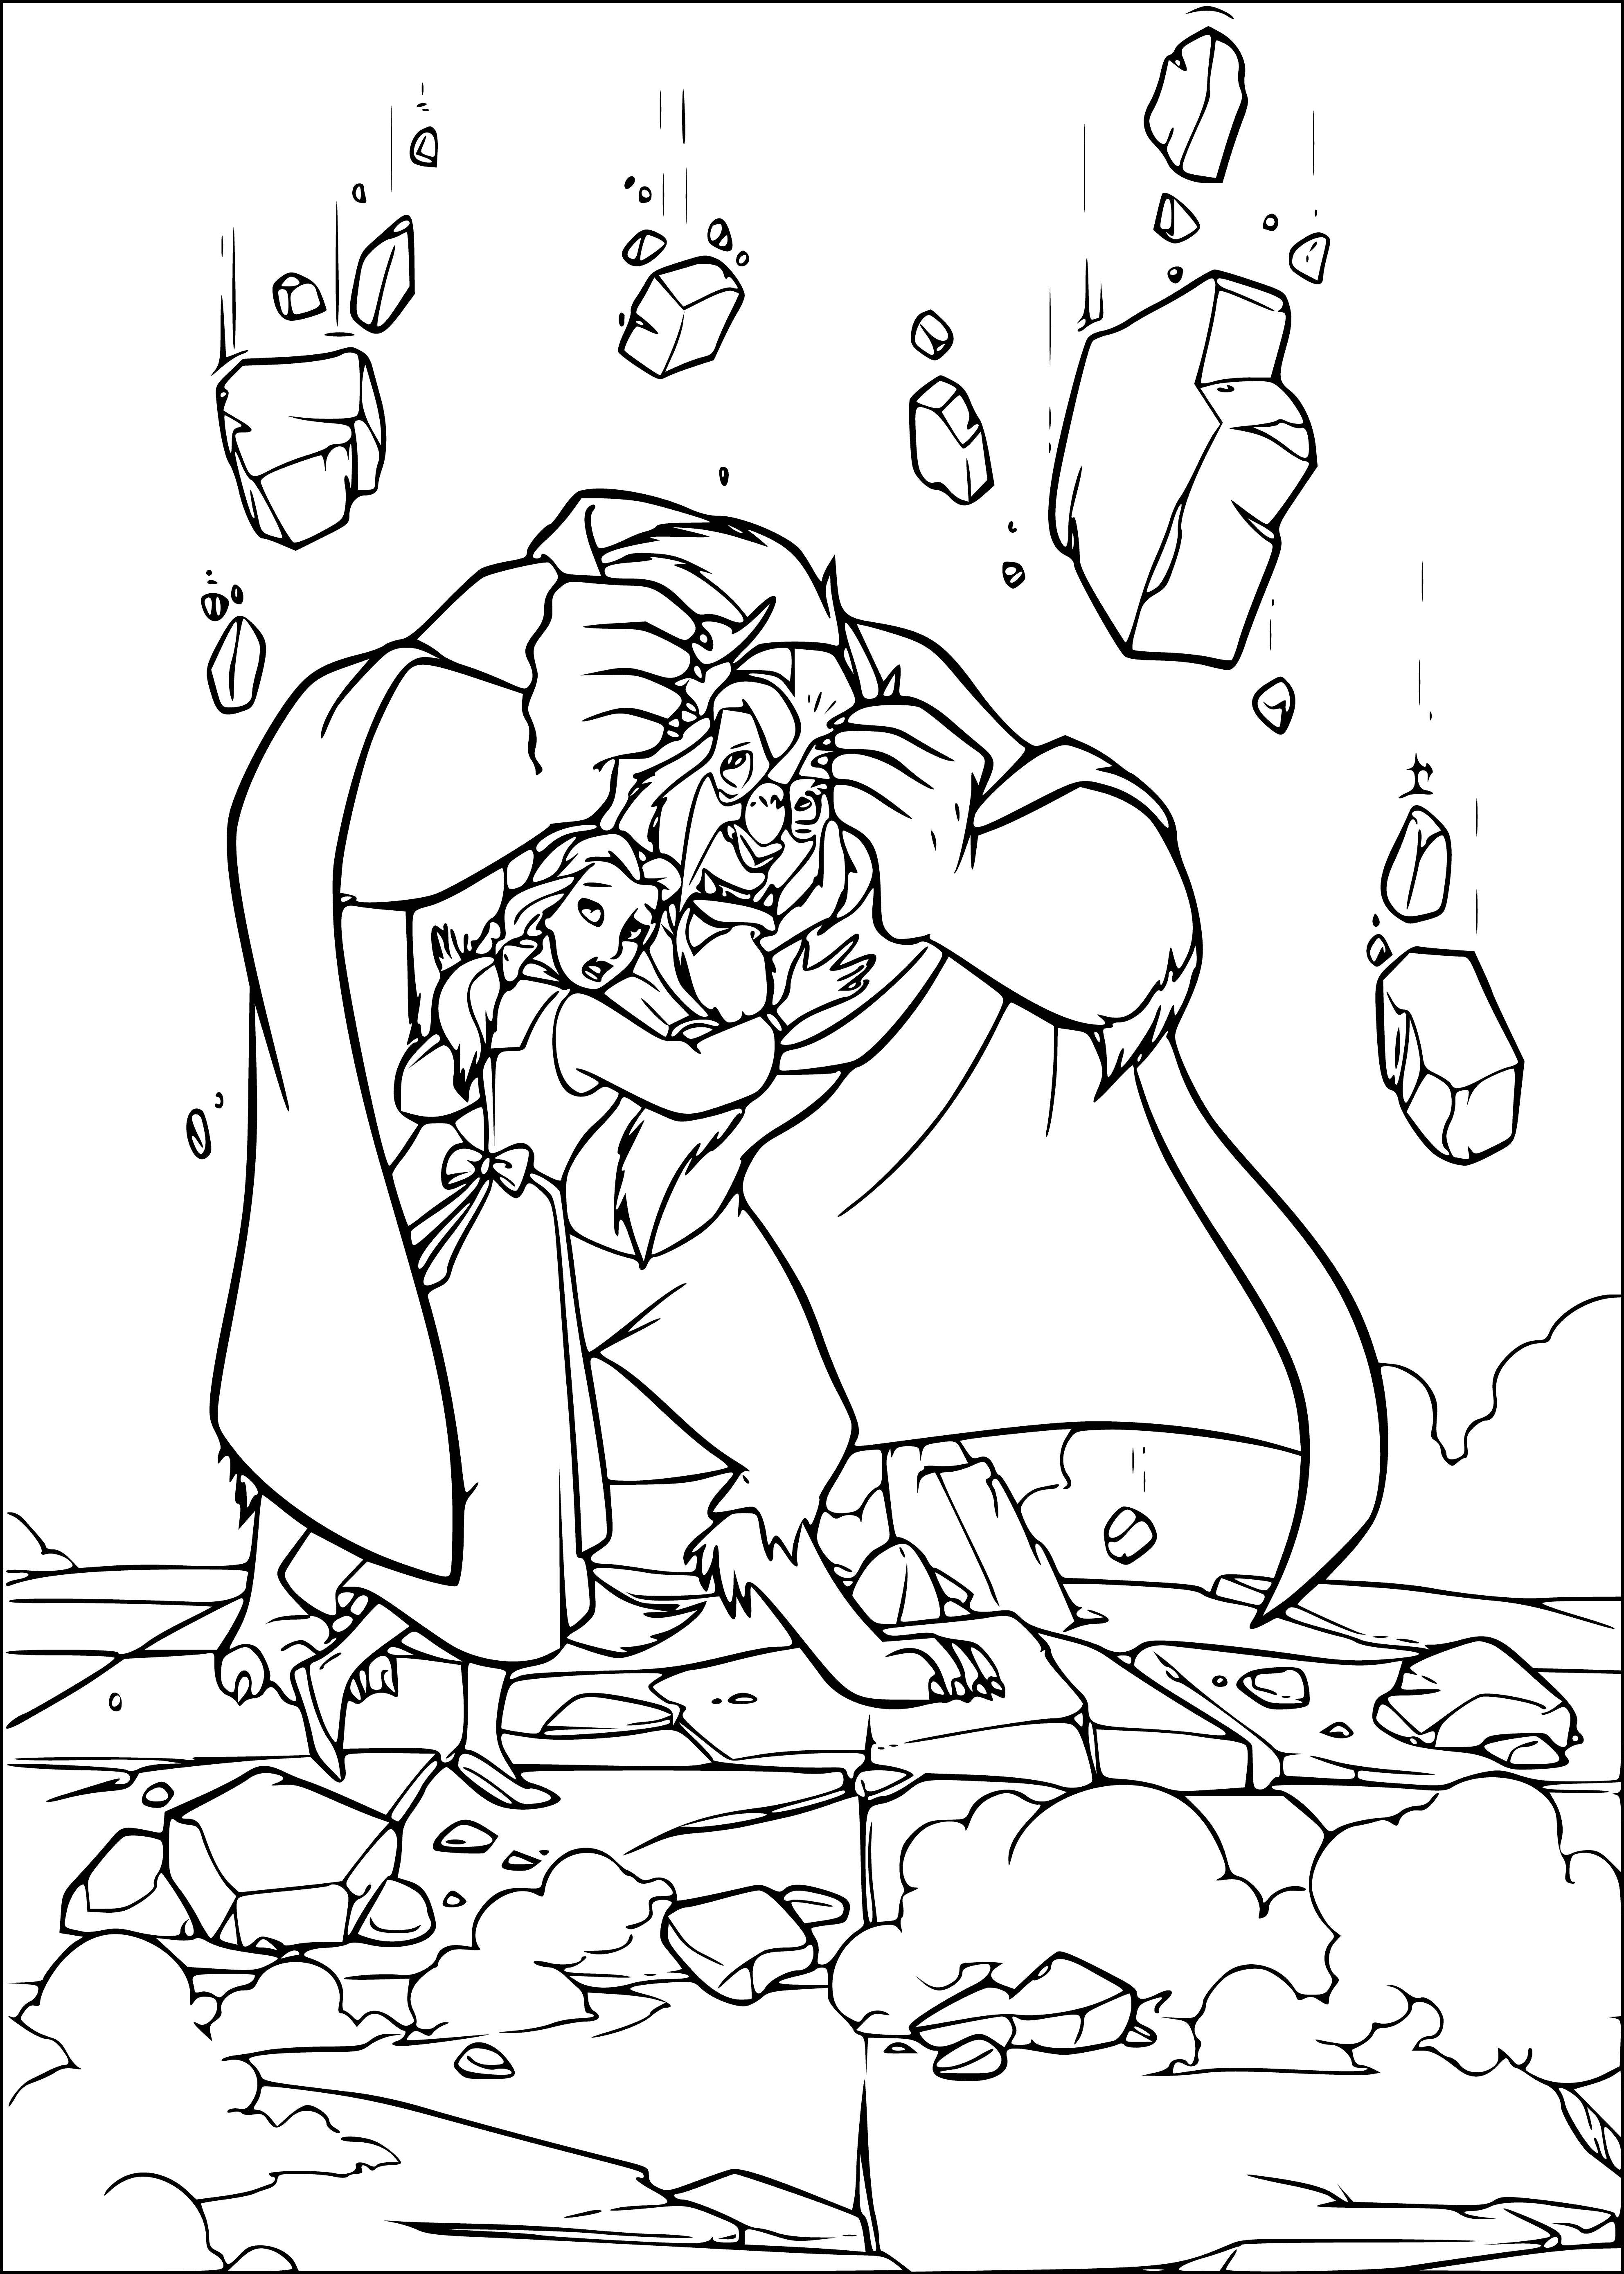 The organ is raging coloring page